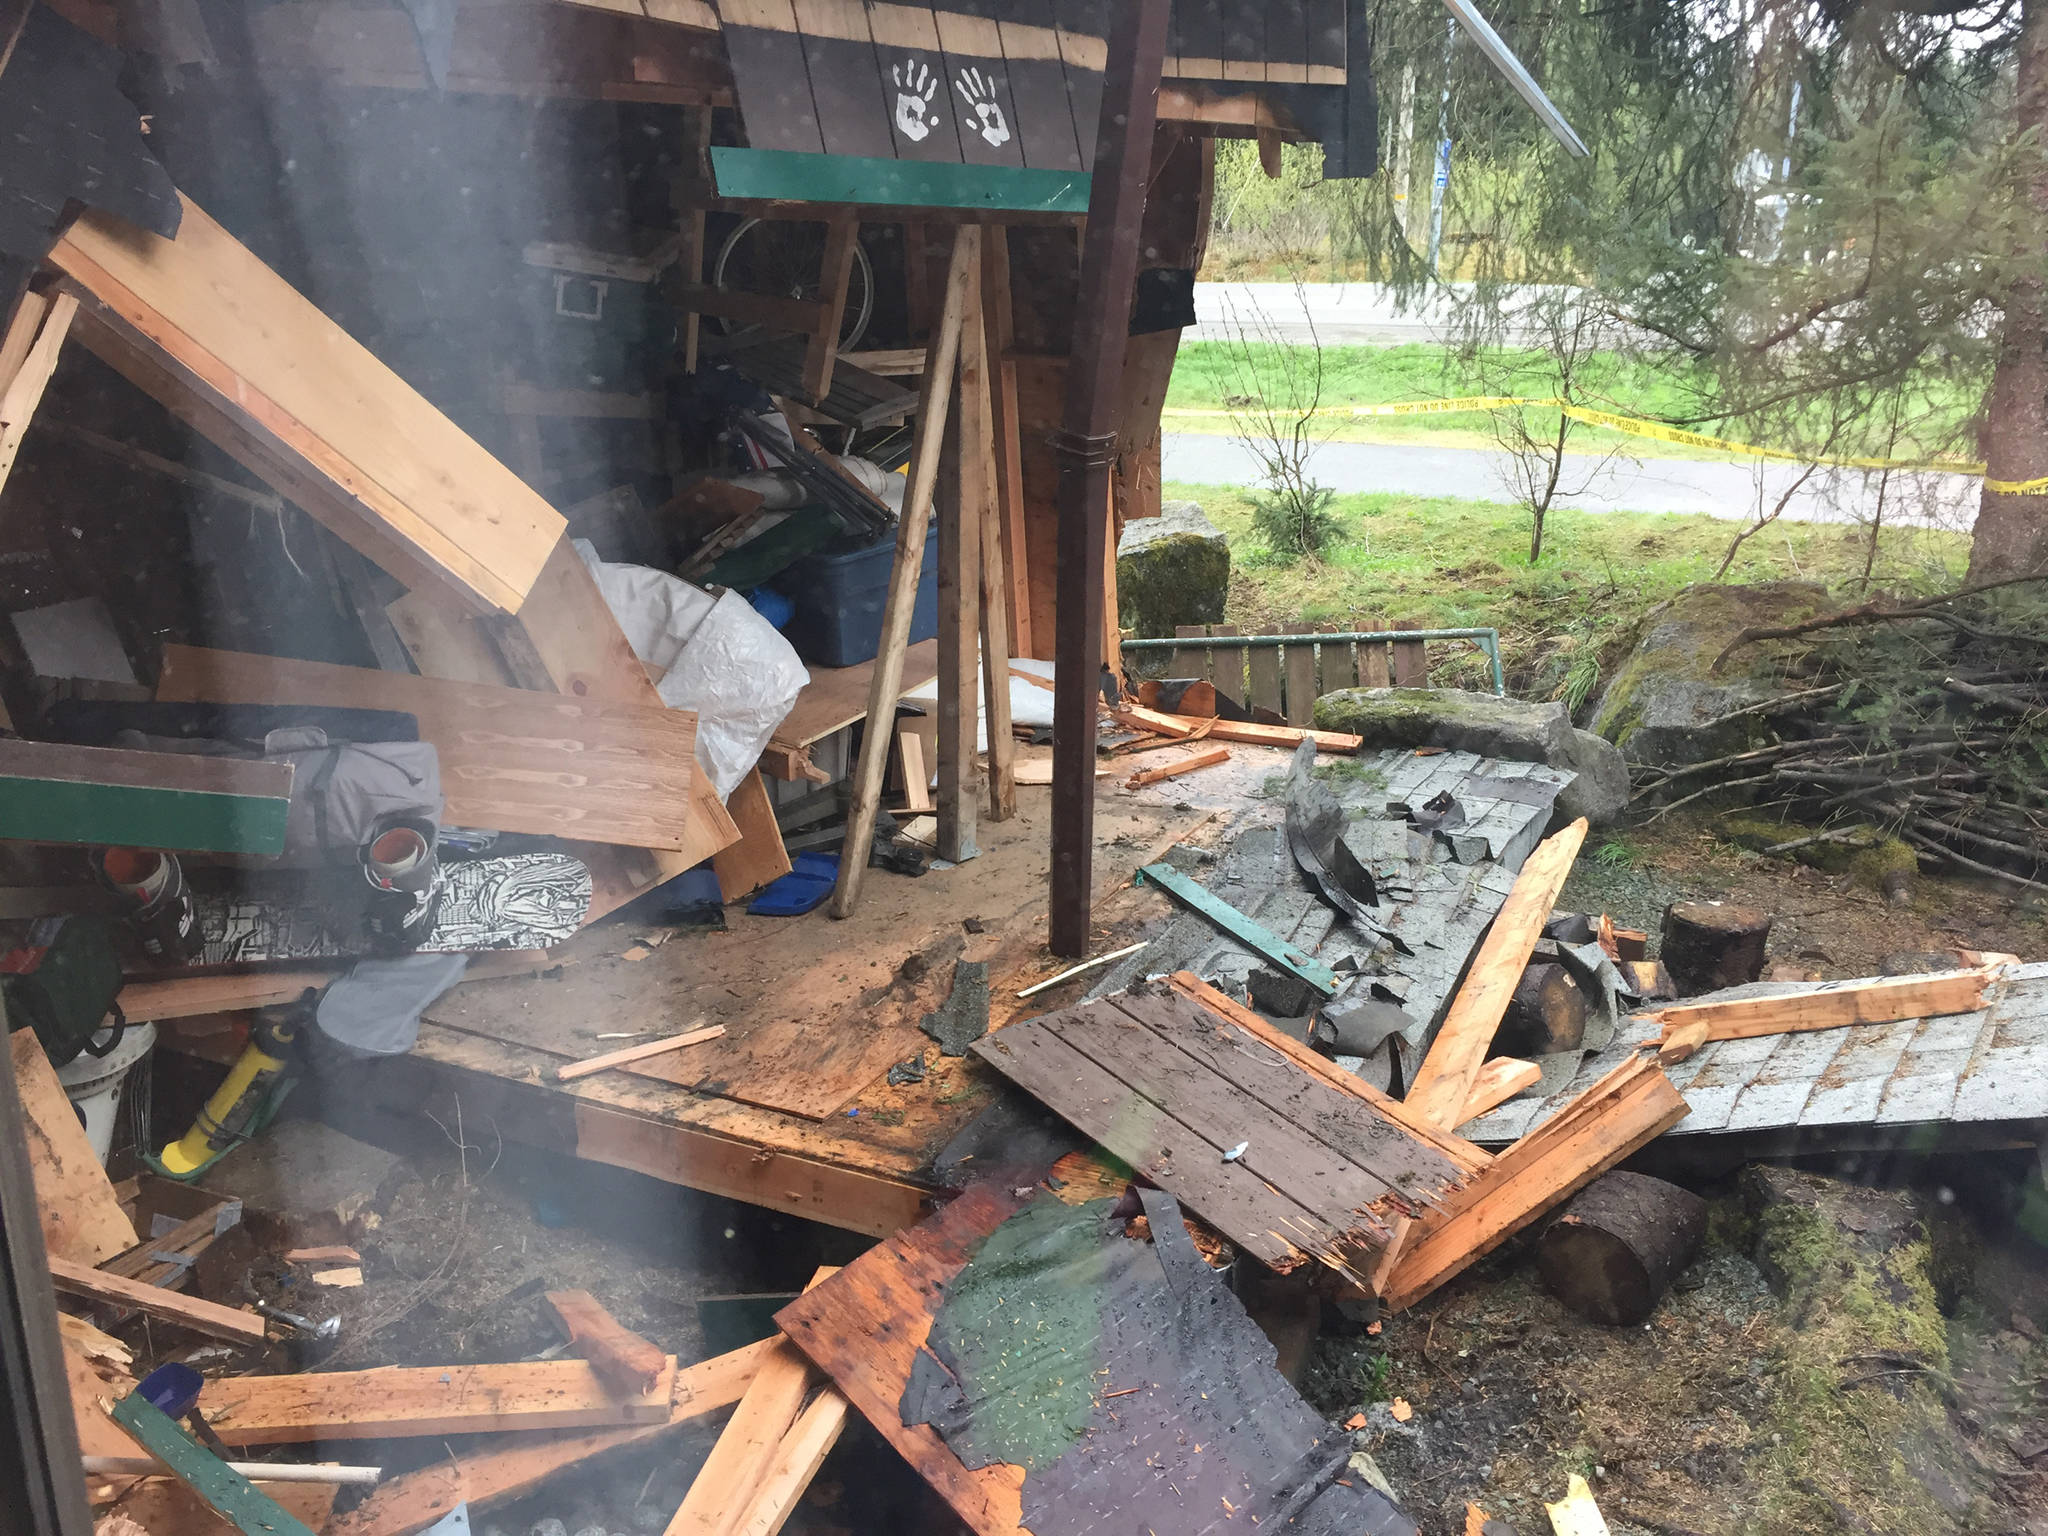 A shed is destroyed outside a Mendenhall Loop home that was hit by a drunk driver on Friday evening. (Kevin Gullufsen | Juneau Empire)